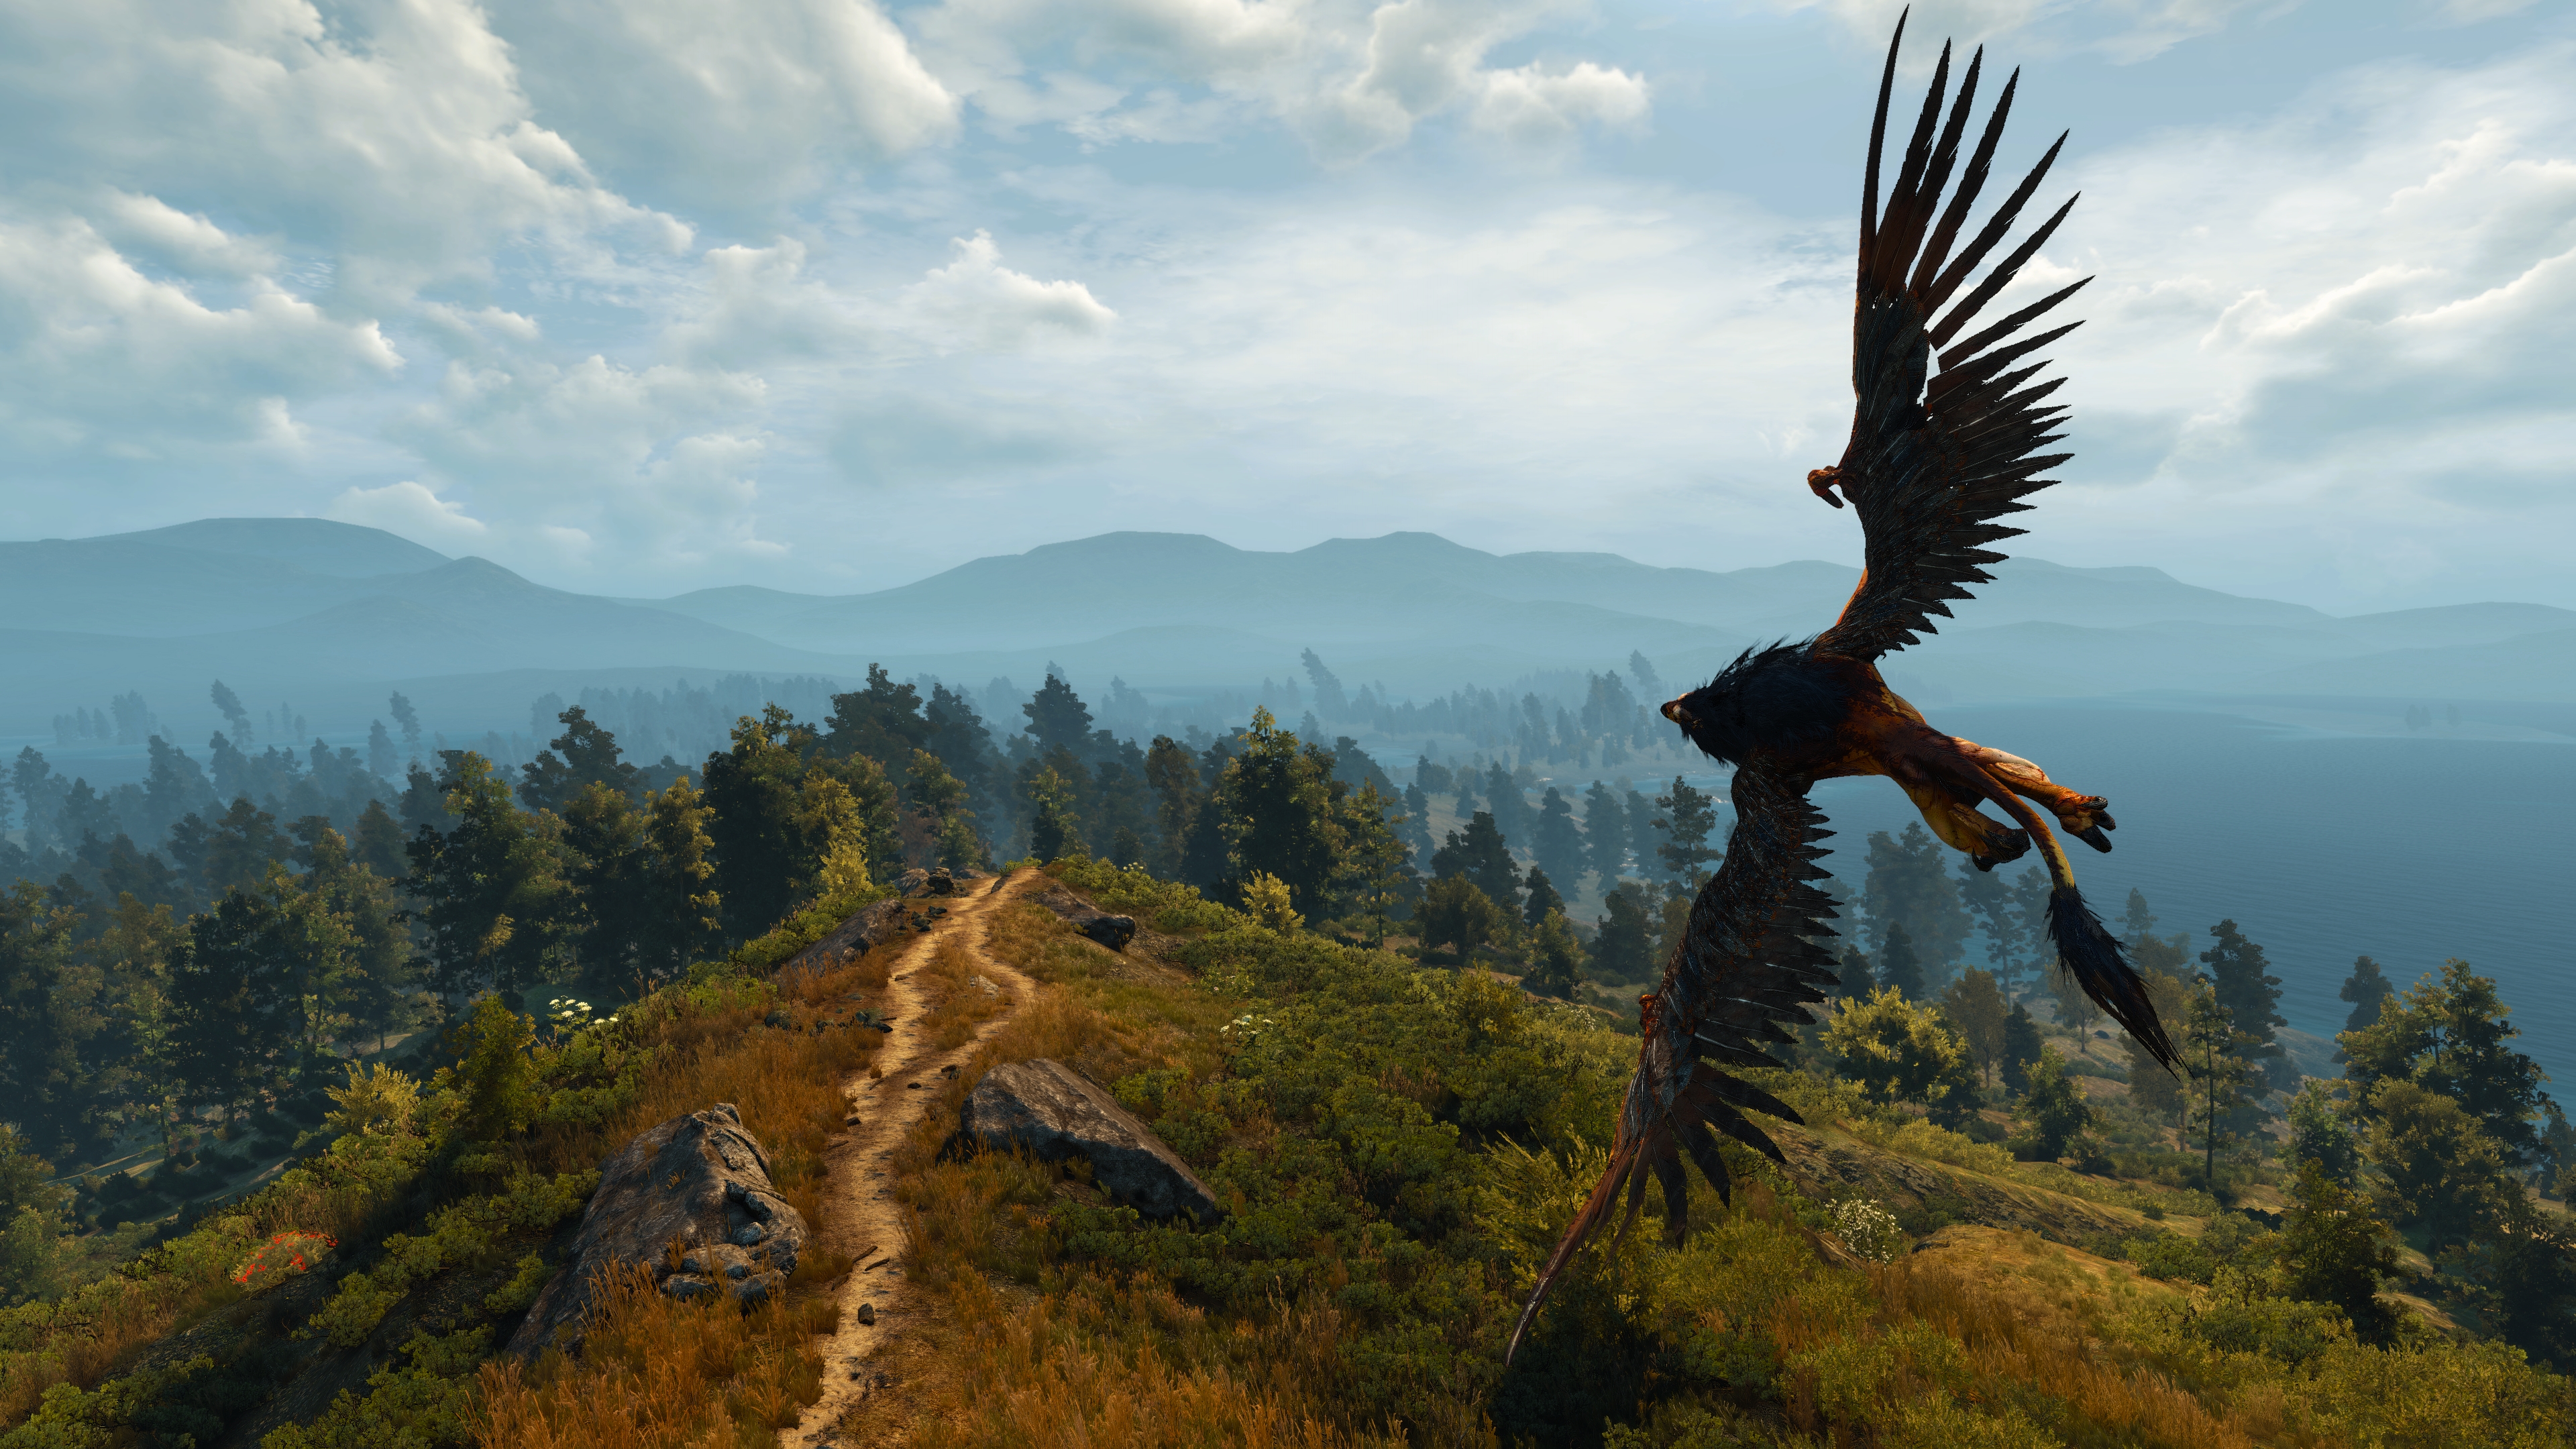 General 3840x2160 The Witcher 3: Wild Hunt screen shot PC gaming griffon creature sky video game art clouds Video Game Creatures CGI landscape nature wings flying trees path mountains